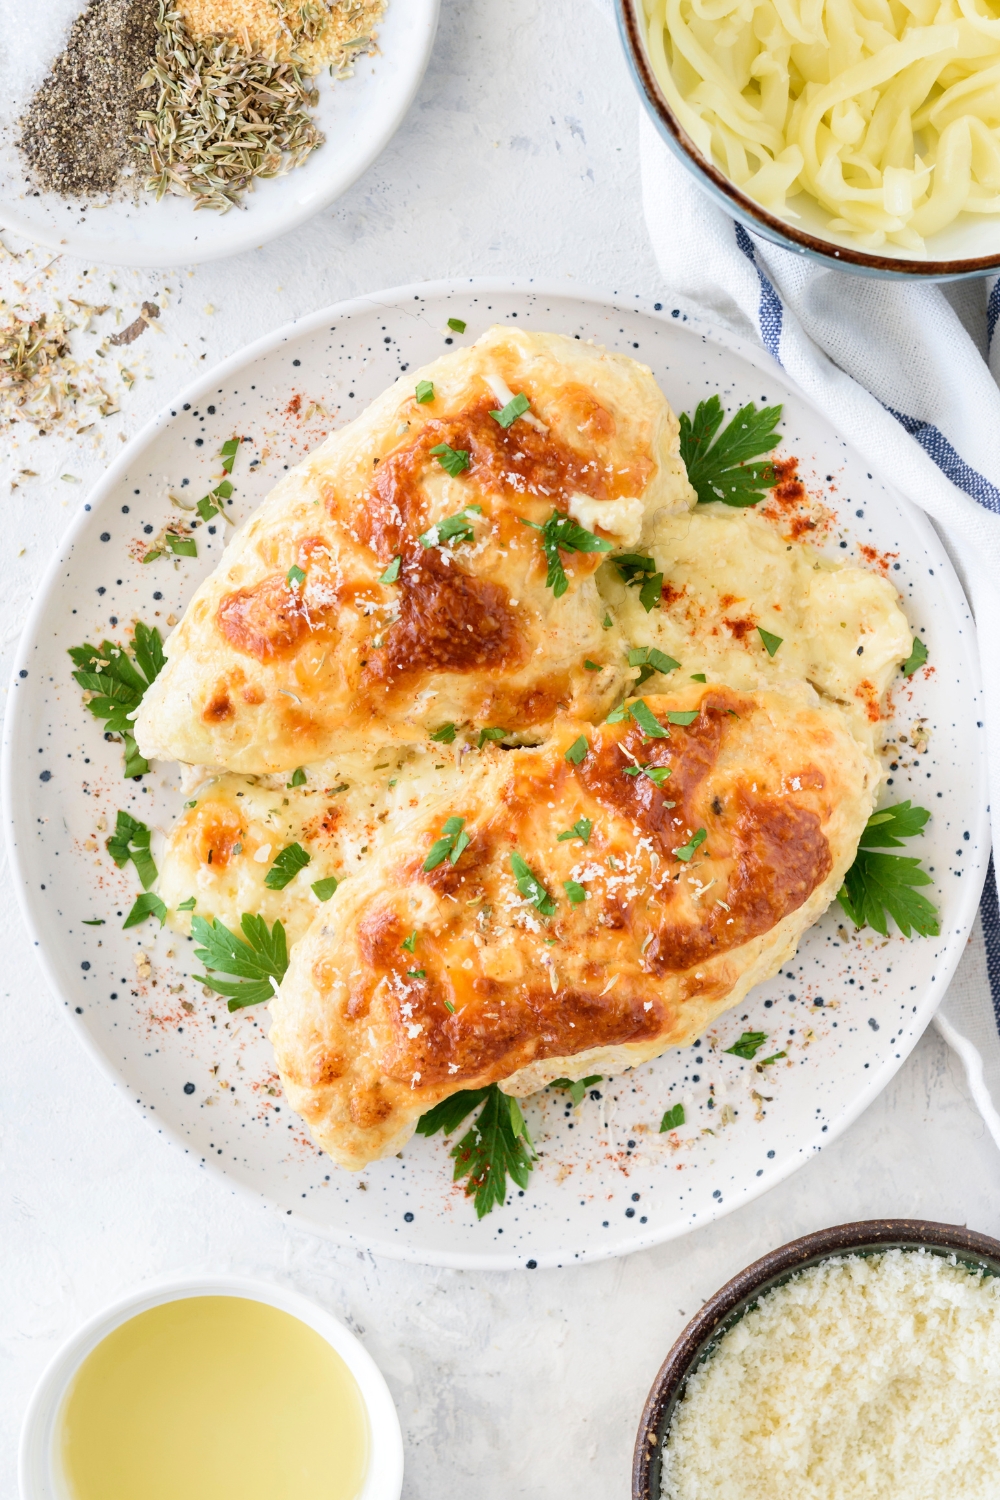 Two freshly baked chicken breasts on a plate garnished with fresh herbs, salt, and spices. The chicken is covered in a creamy sauce.